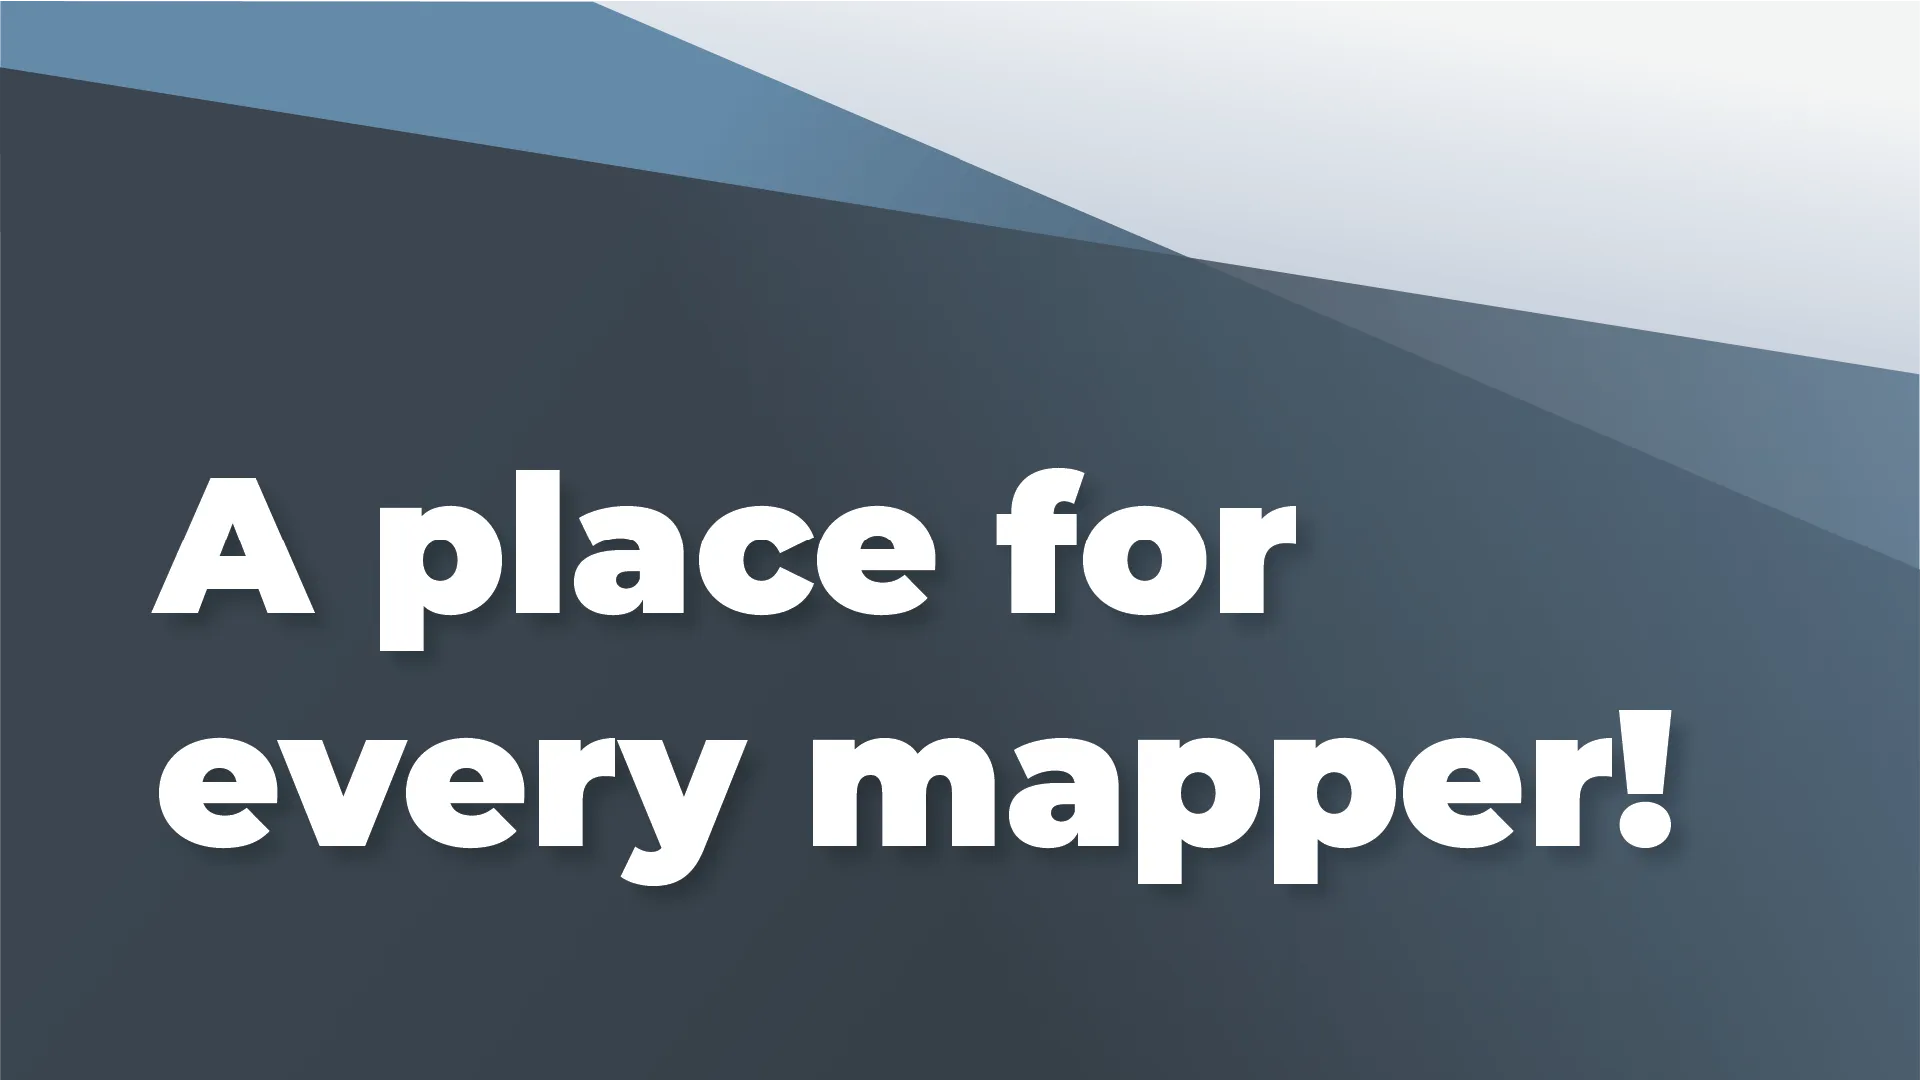 With NgRx Effects, There's A Place for Every Mapper!